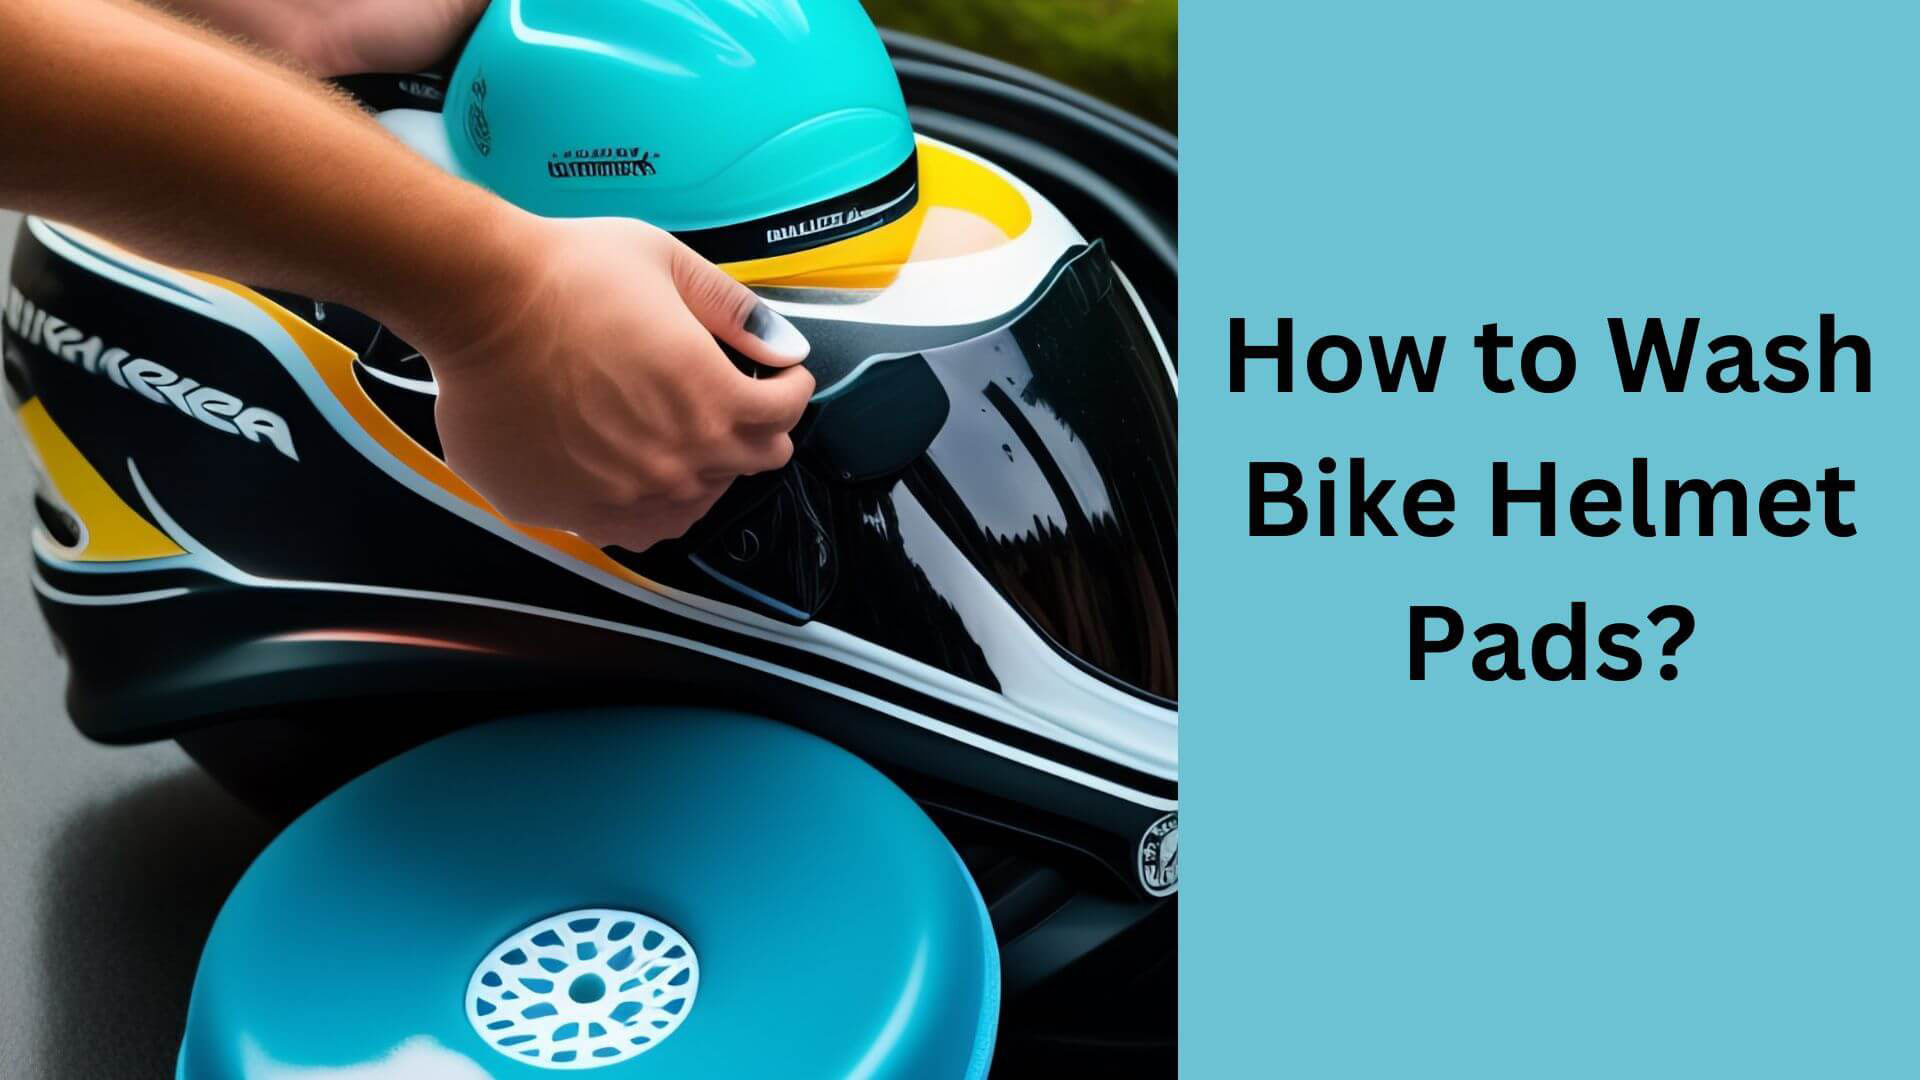 How to Wash Bike Helmet Pads? Step-by-Step Instruction